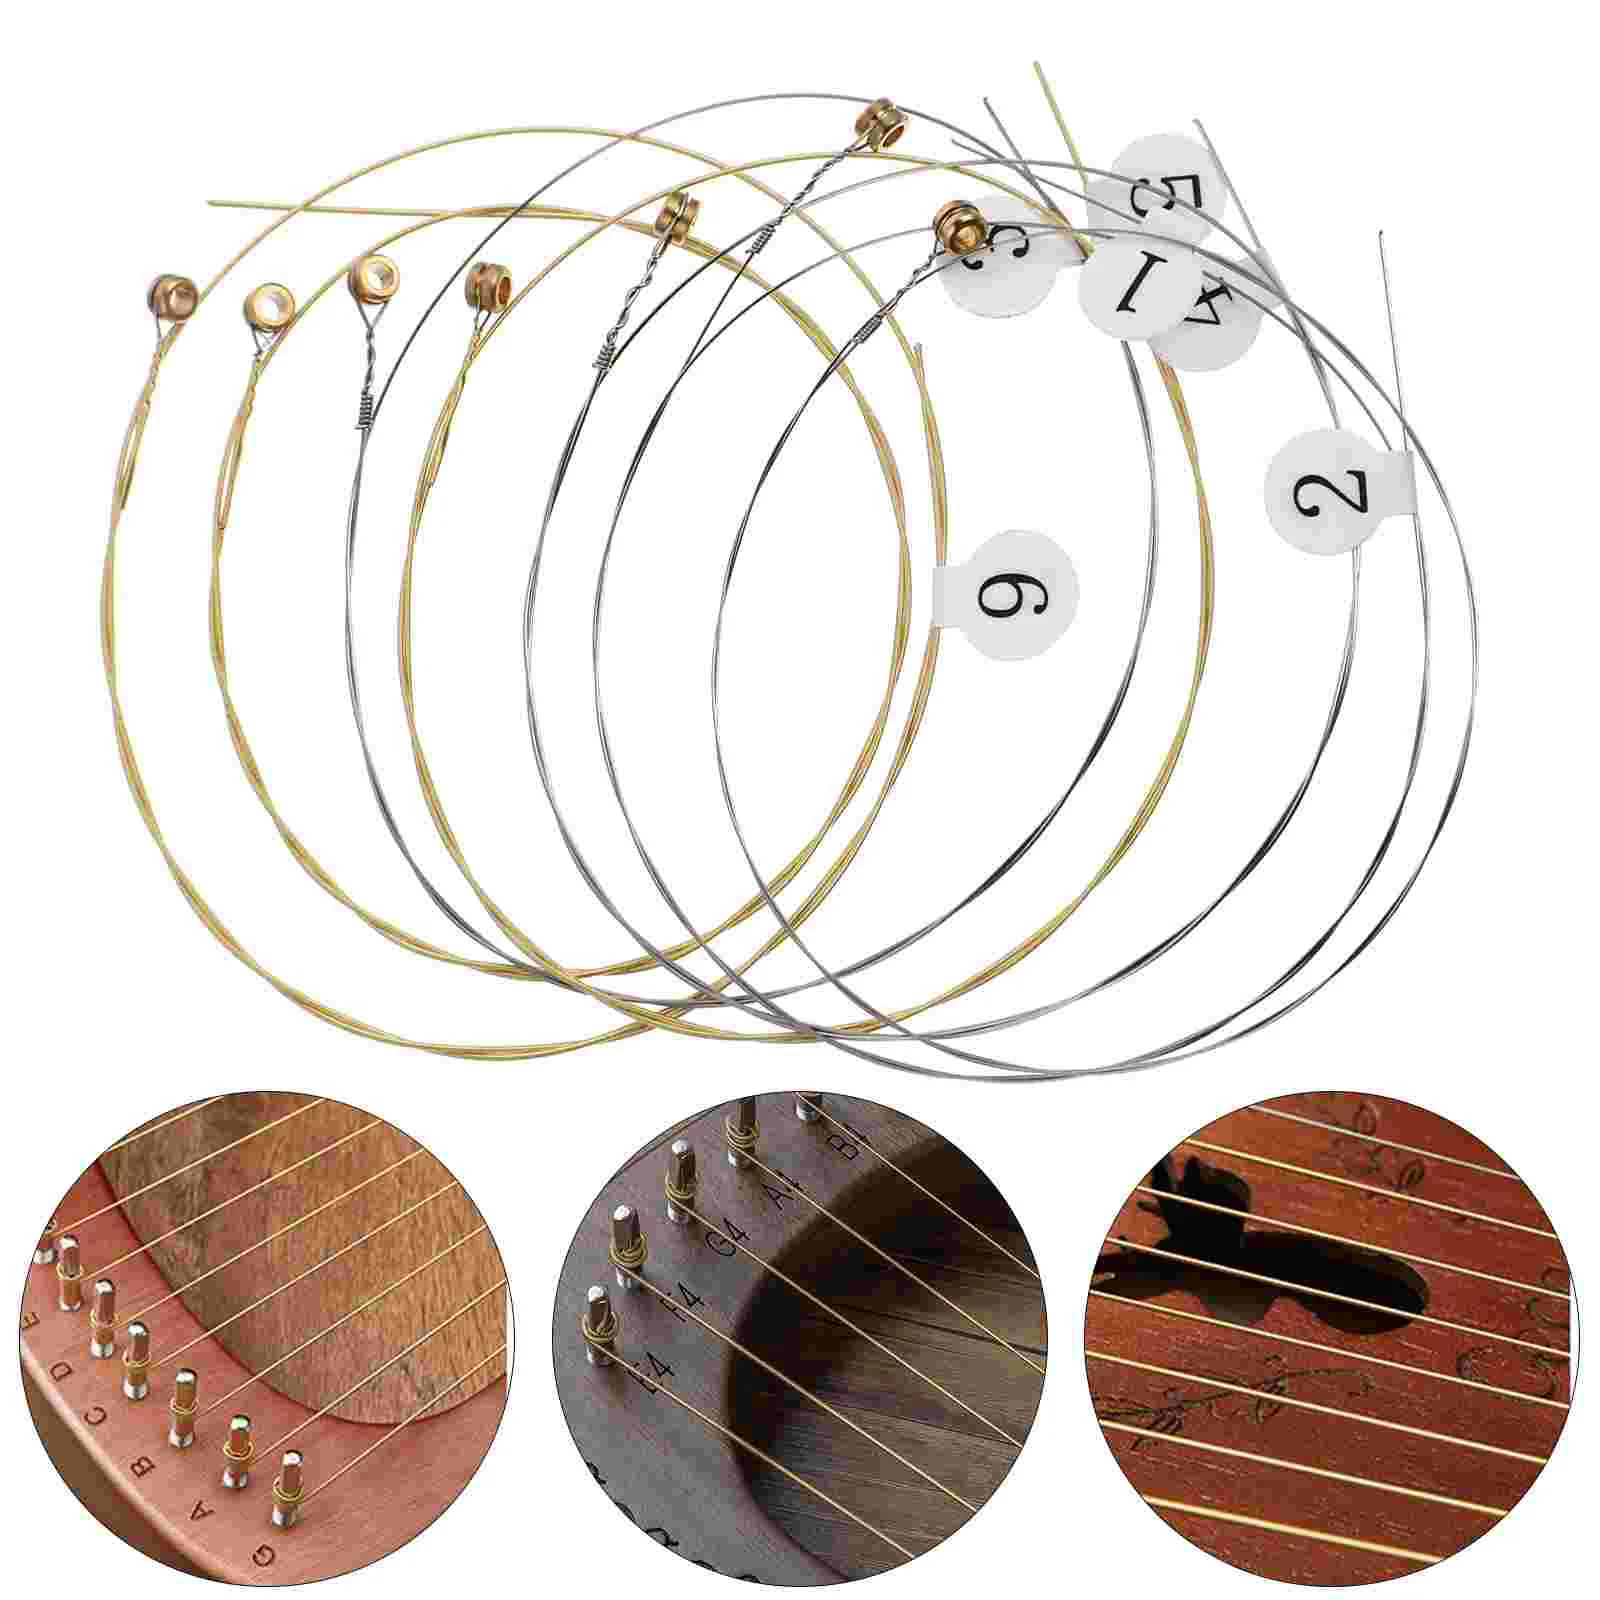 

7pcs Lyre Harp String Replacement Metal String Musical Instrument Accessories for Lyre Harp Harpsichord Dulcimer Zither